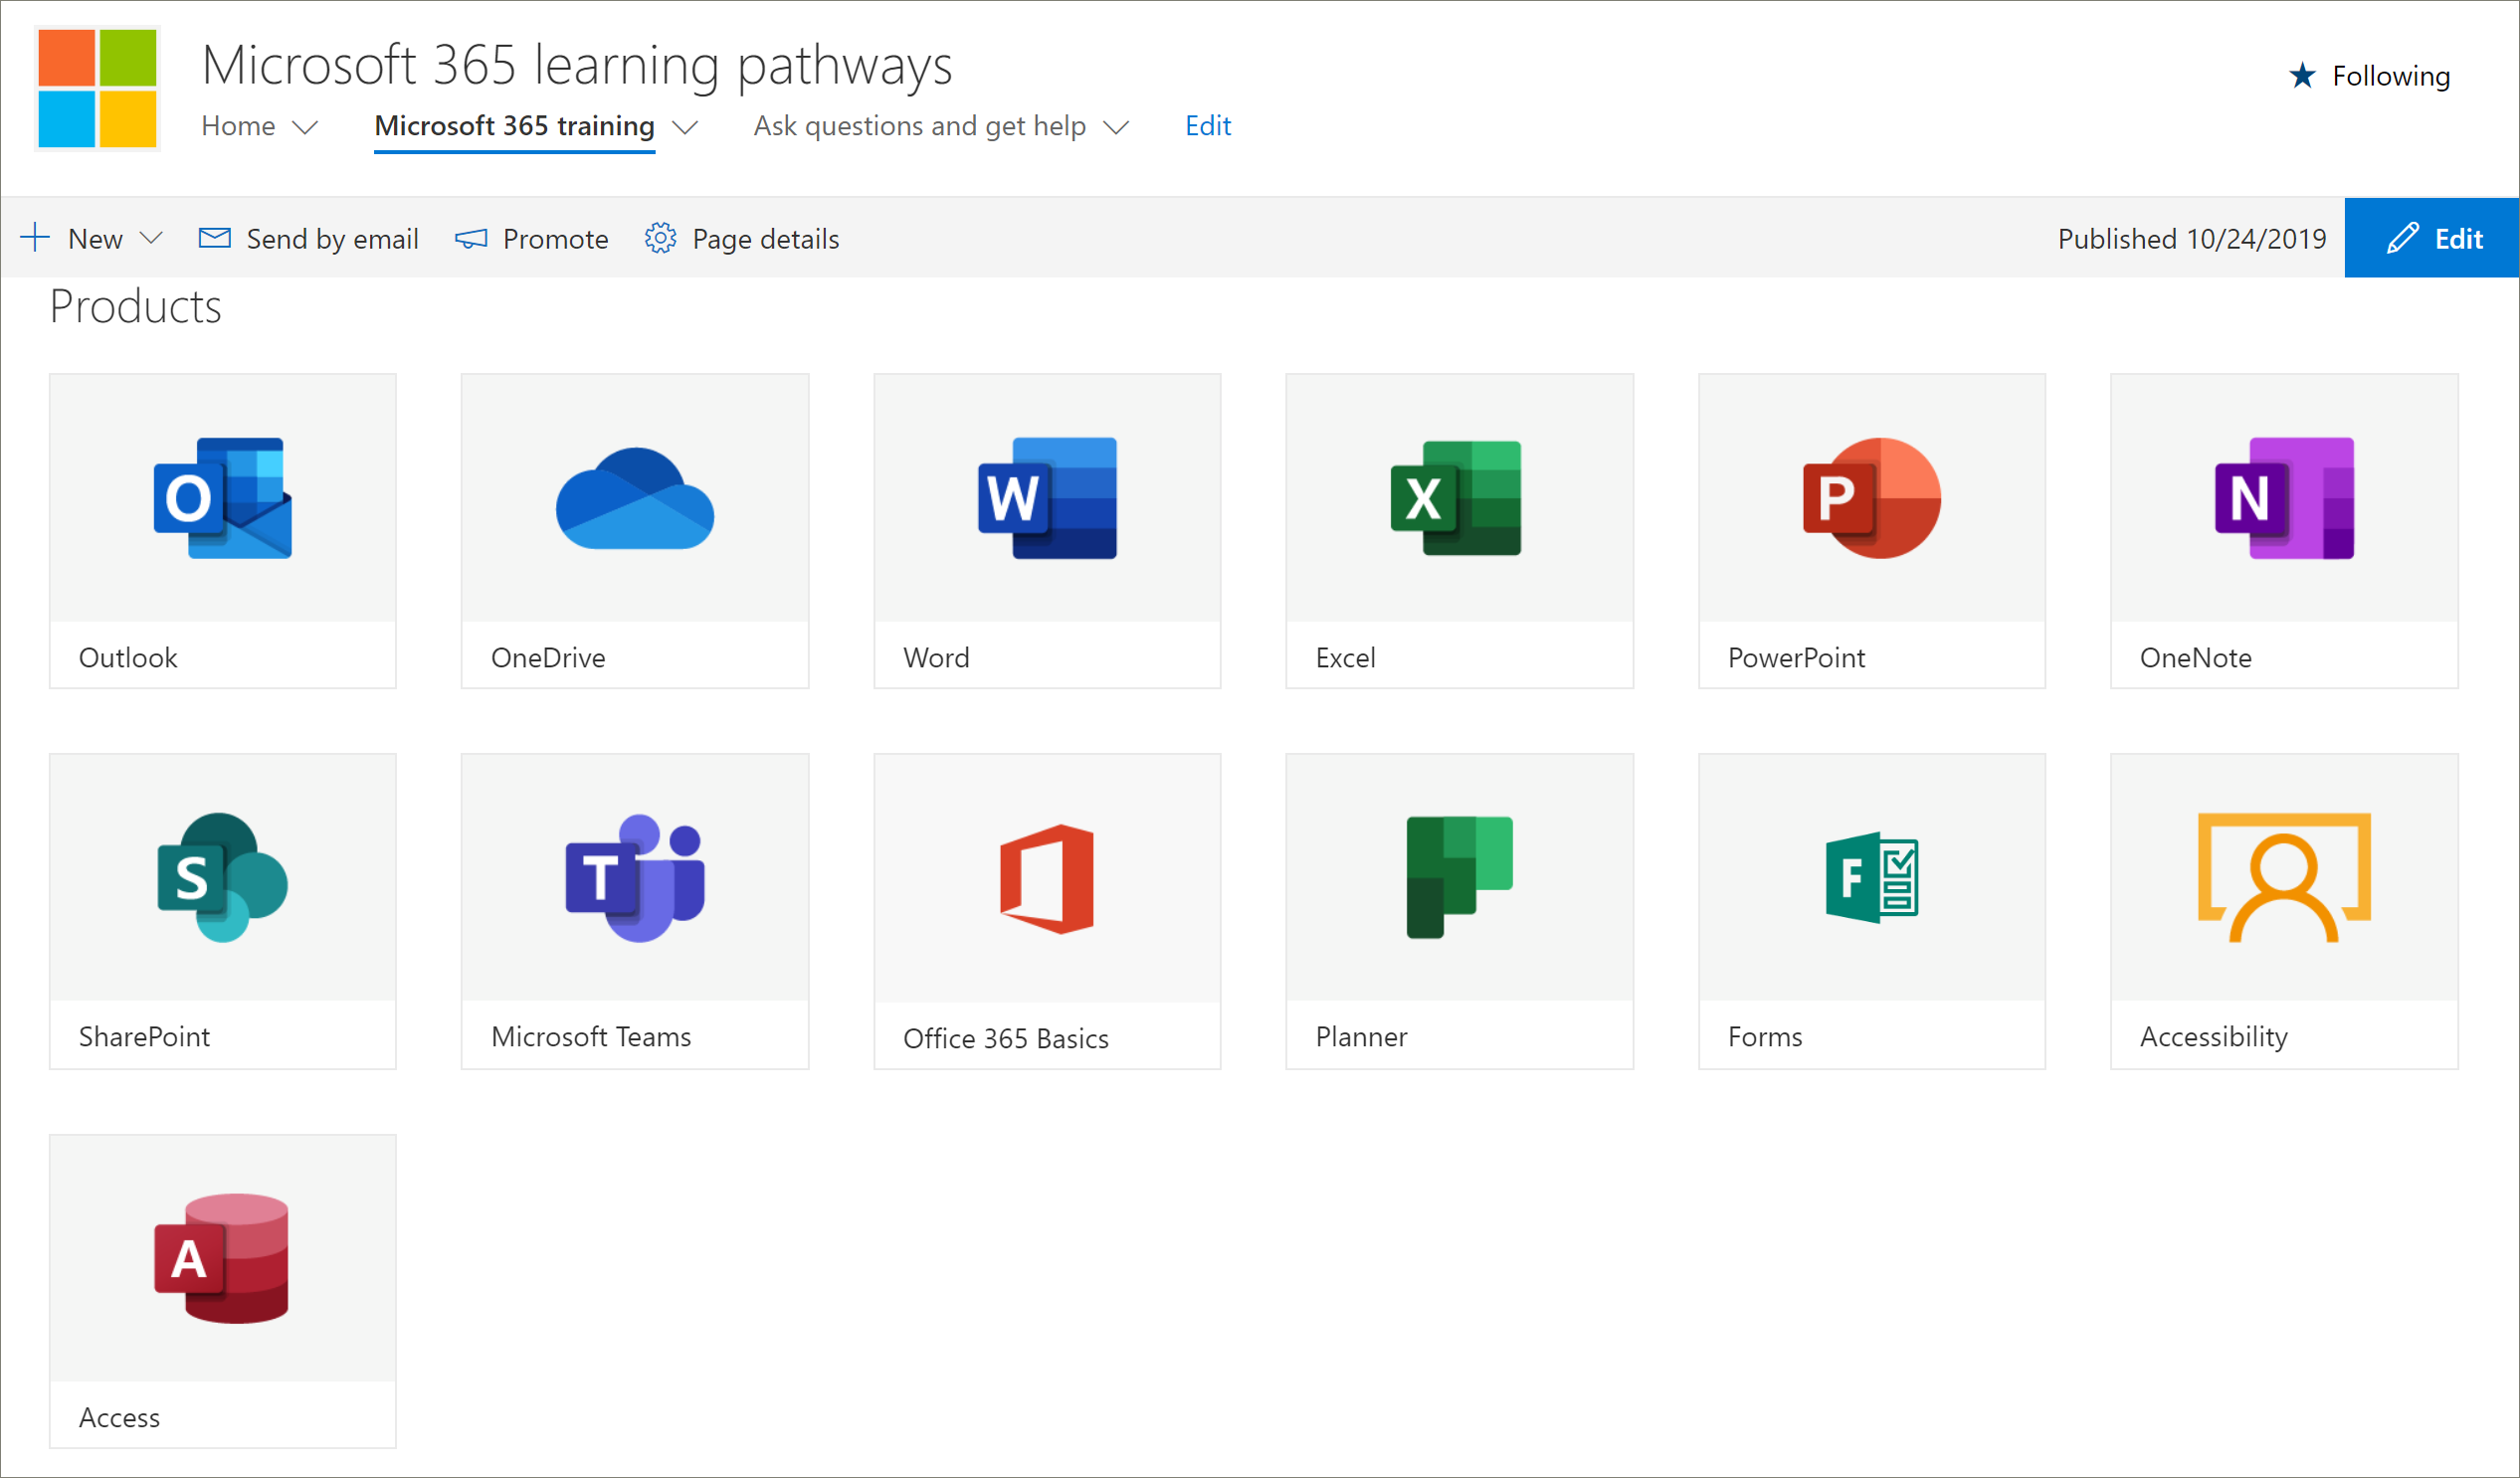 Web part of Office 365